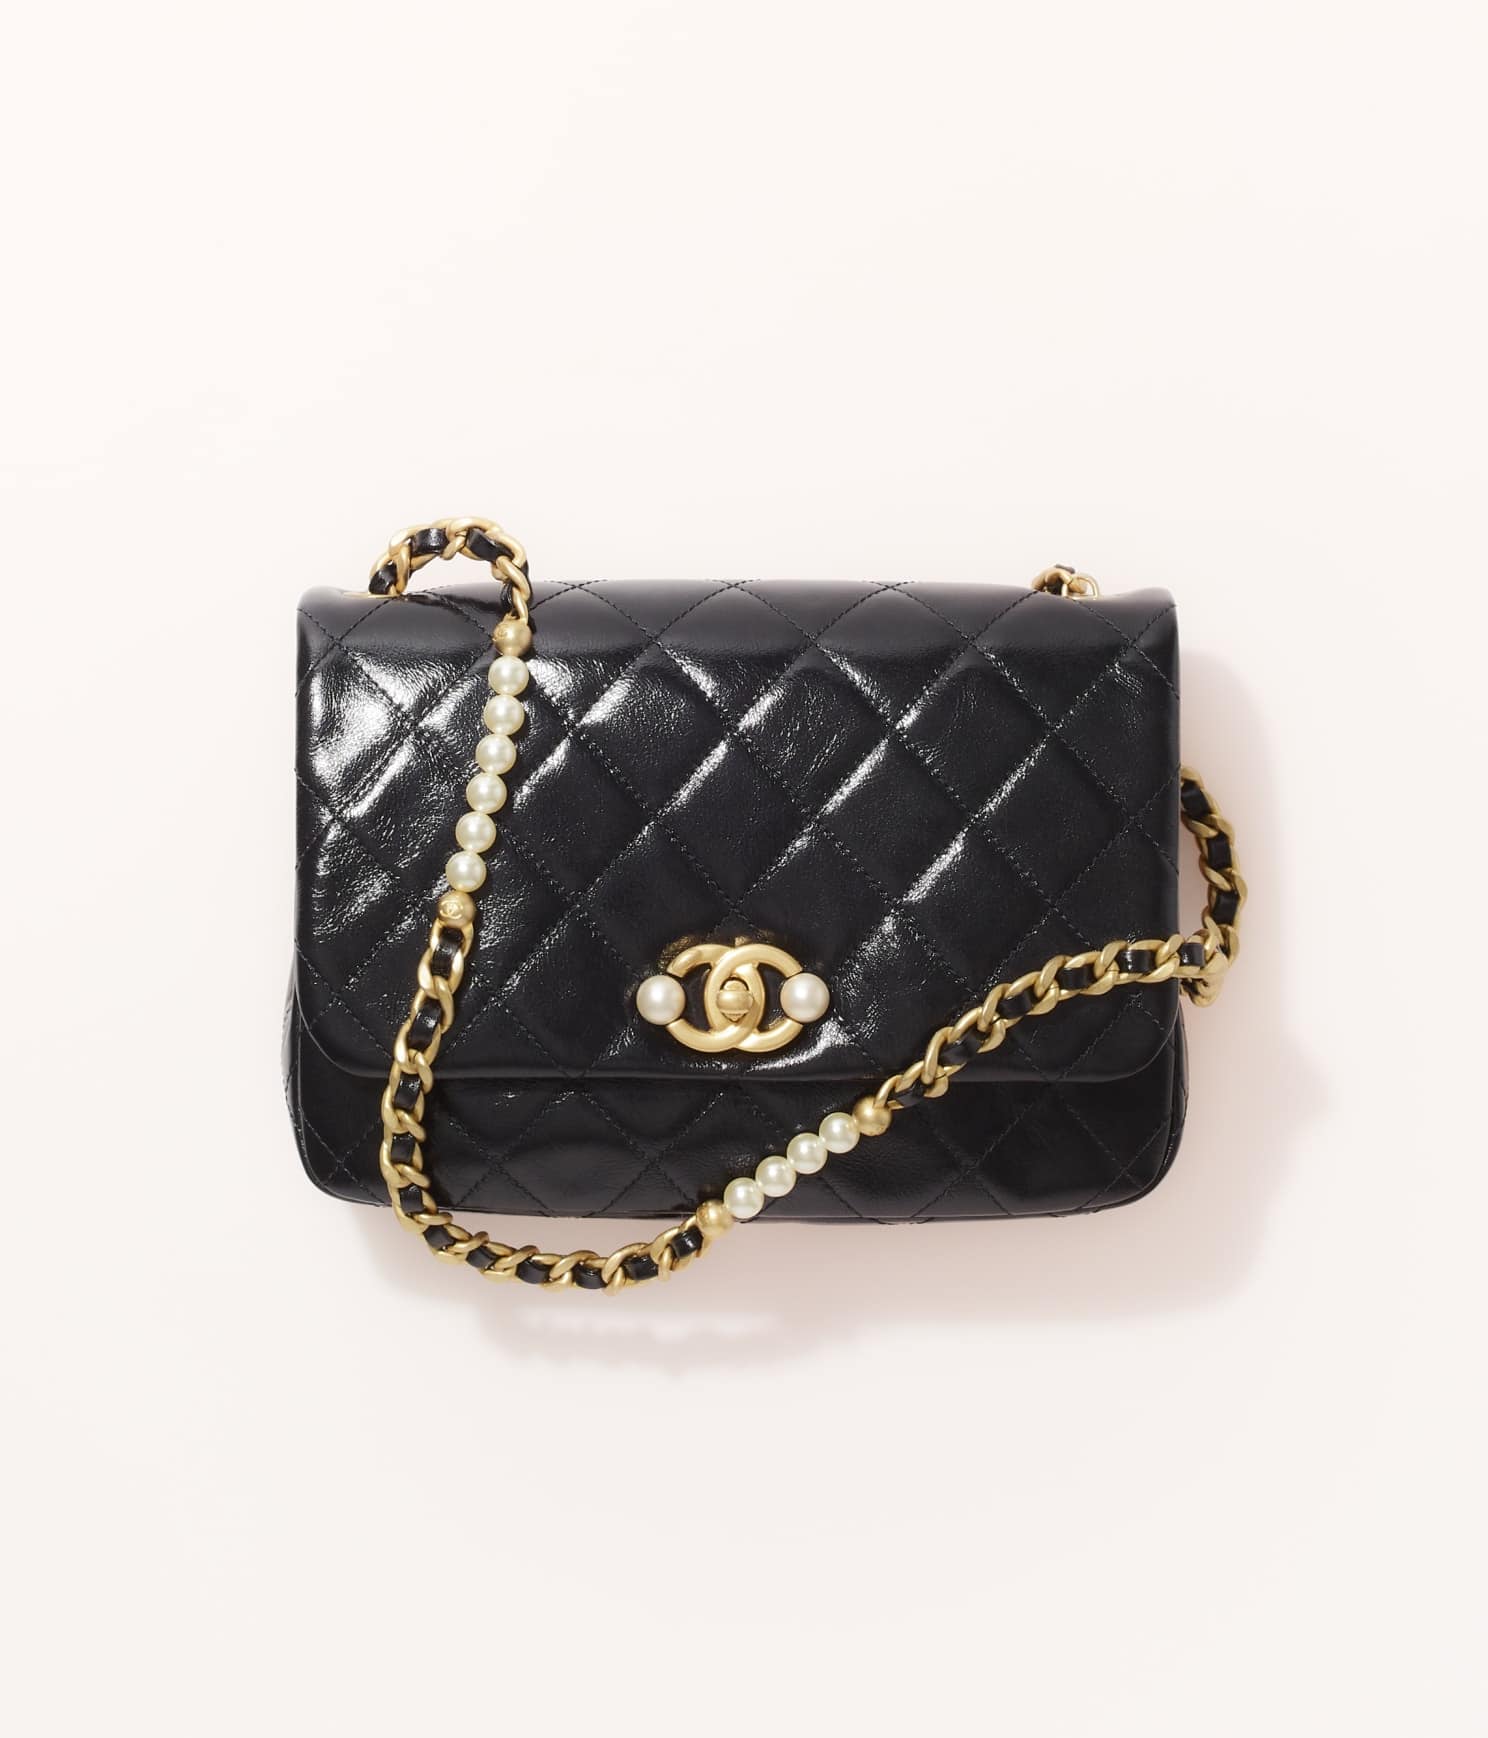 Chanel 19 leather crossbody bag Chanel Black in Leather  25090715